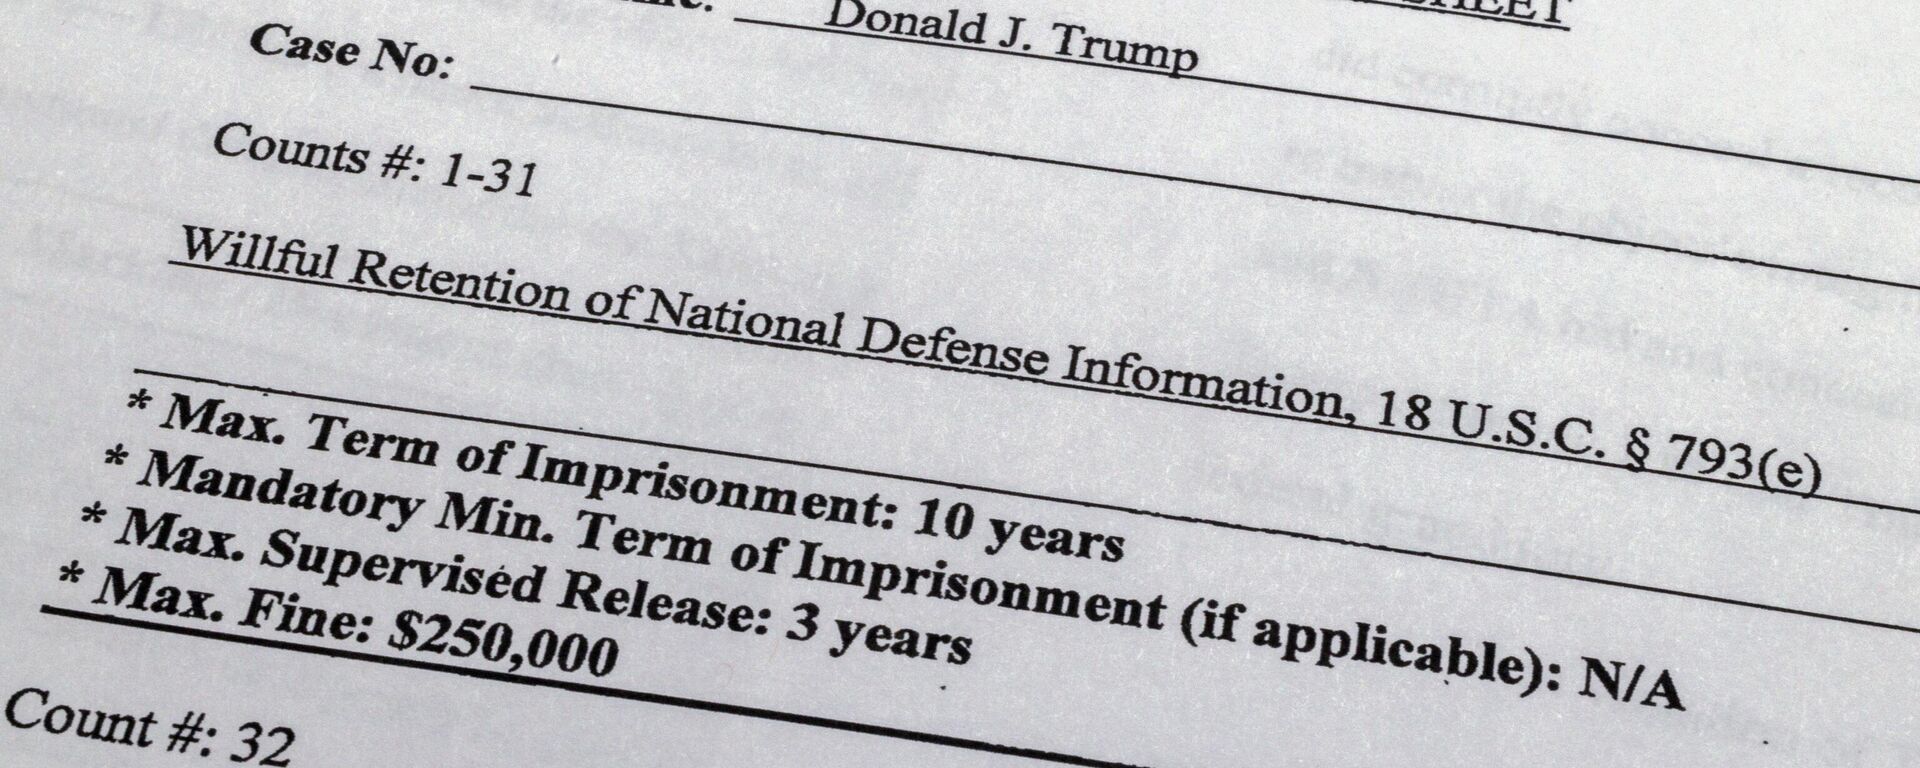 The indictment against former President Donald Trump is photographed on Friday, June 9, 2023. Trump is facing 37 felony charges related to the mishandling of classified documents according to the unsealed indictment that also alleges that he improperly shared a Pentagon plan of attack and a classified map related to a military operation. - Sputnik International, 1920, 24.06.2023